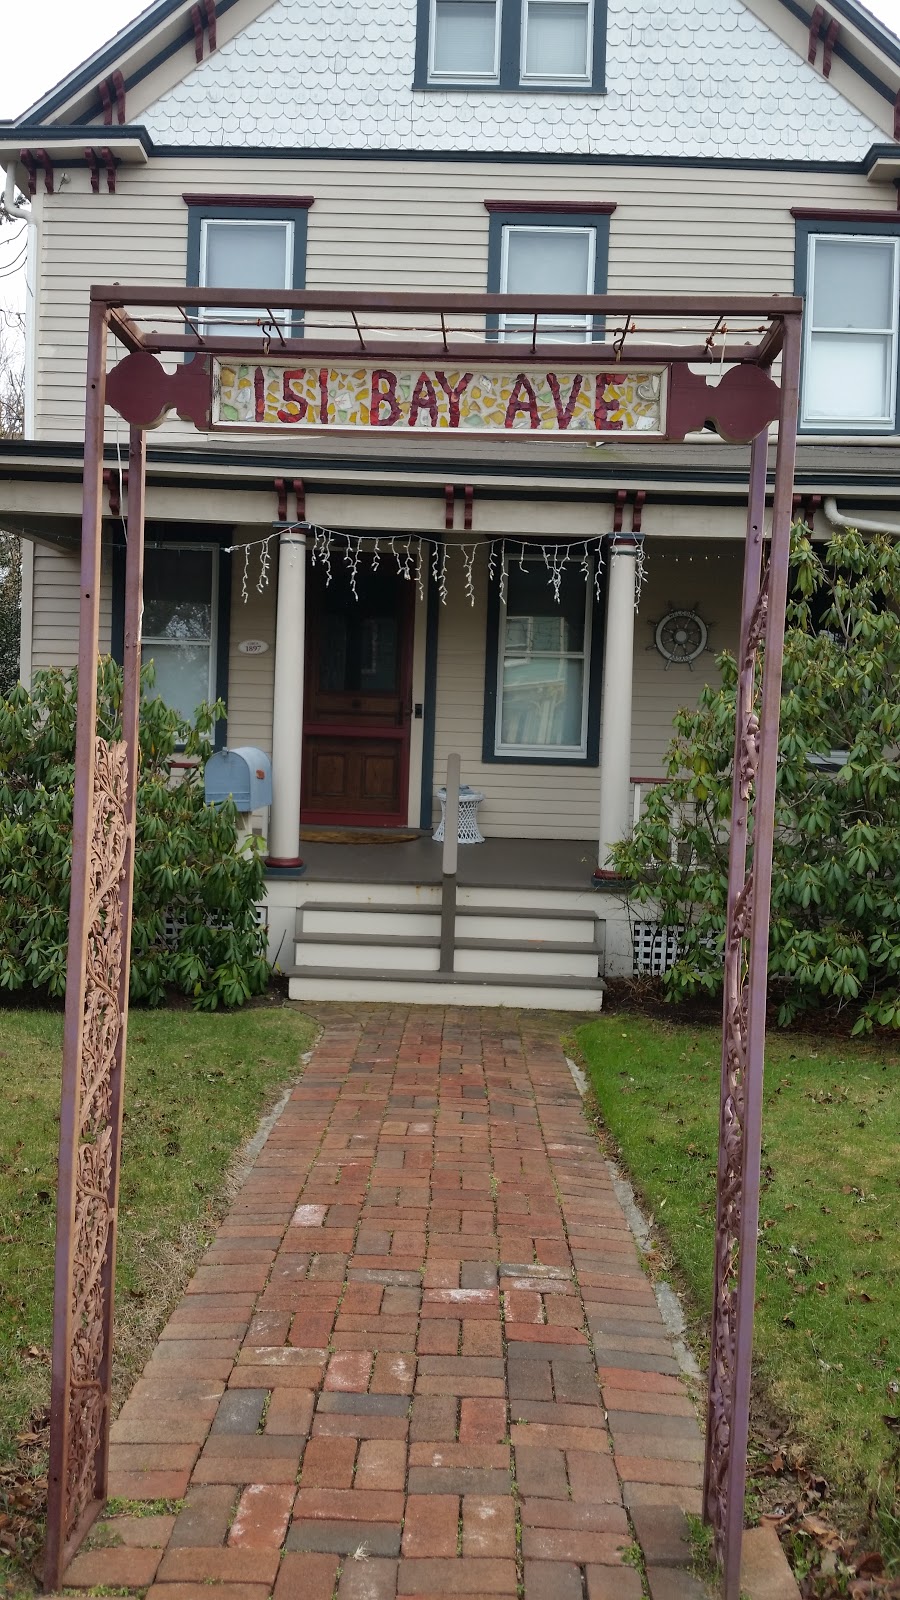 Whalers Guest House | 151 Bay Ave, Greenport, NY 11944 | Phone: (631) 477-1837